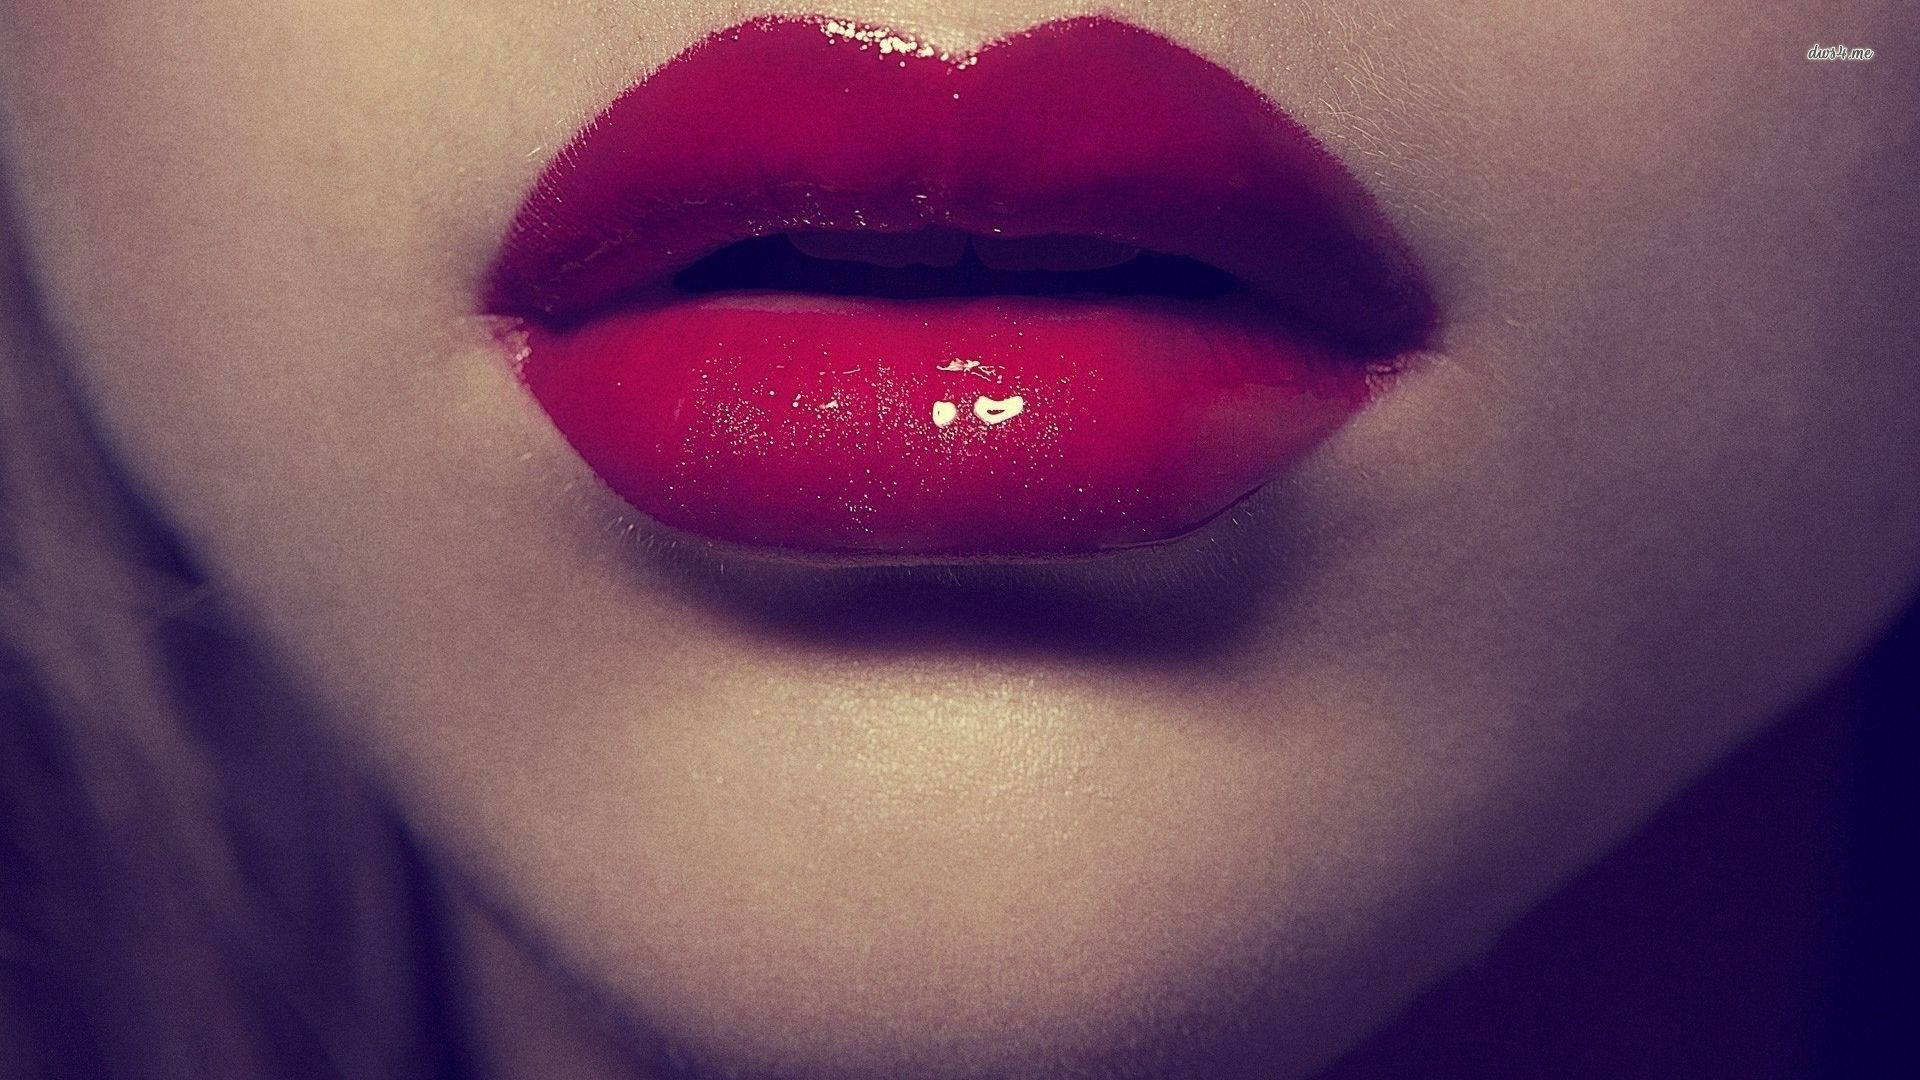 Red lips wallpaper - Photography wallpapers